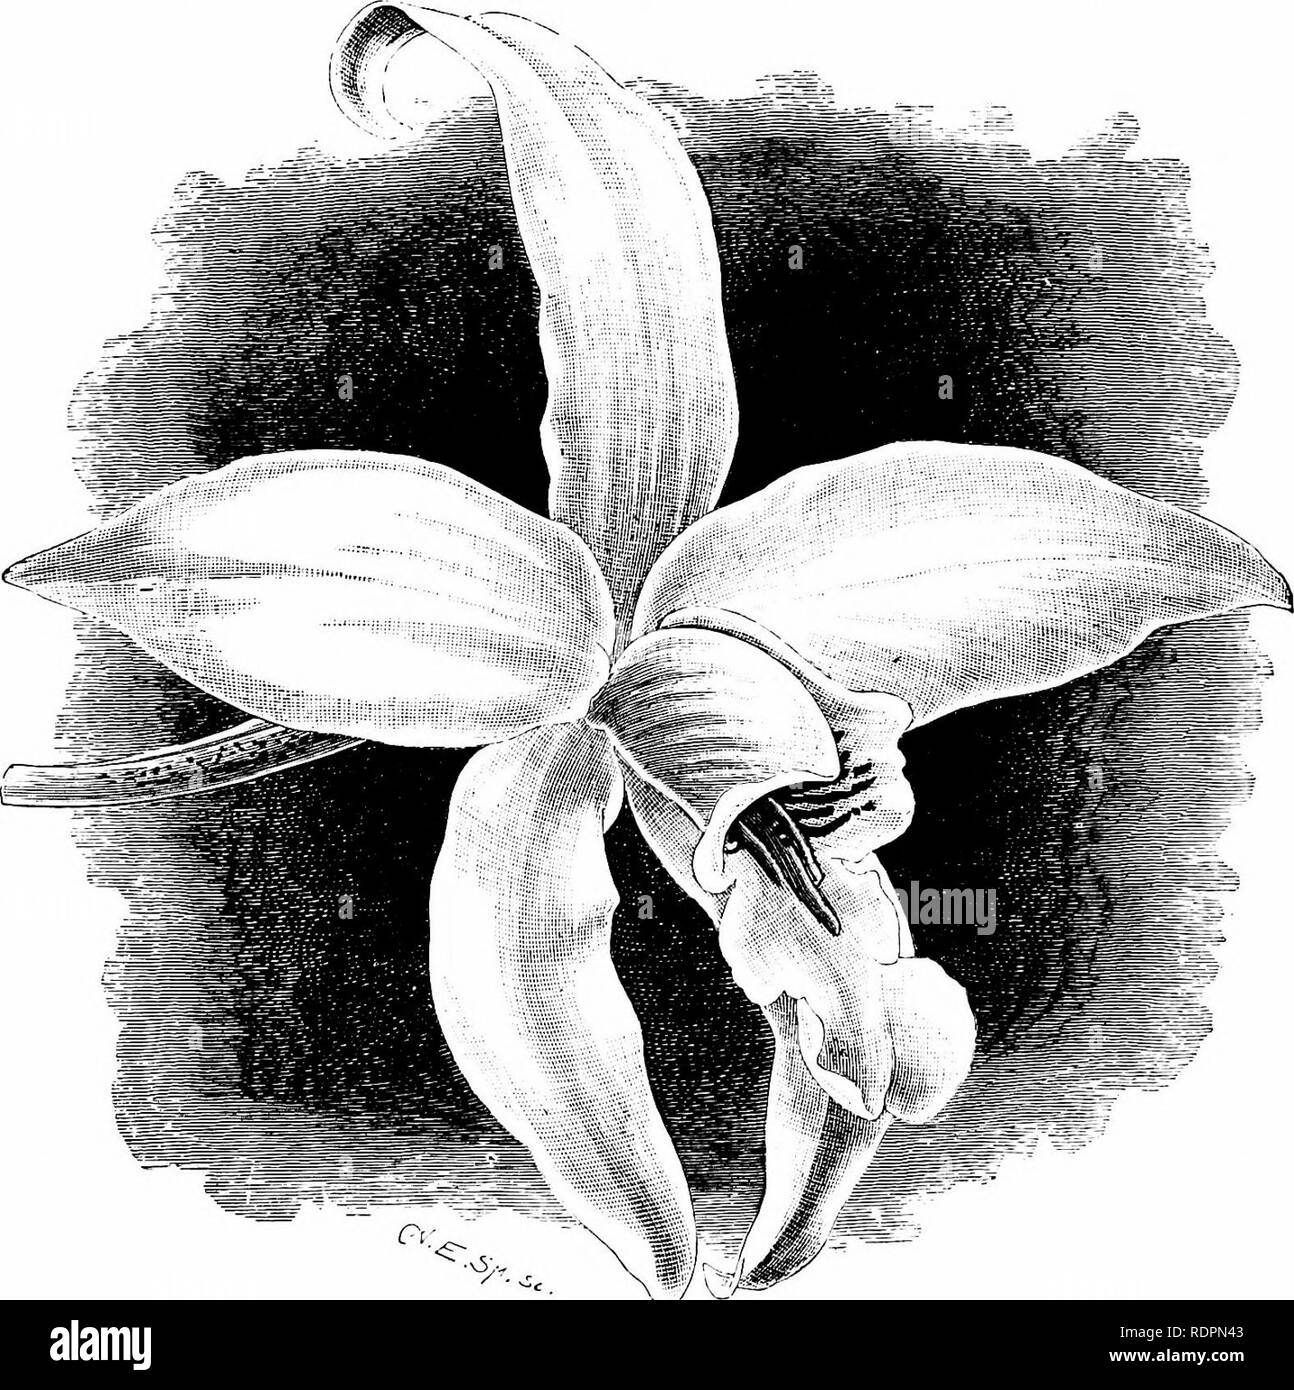 . The orchid-grower's manual, containing descriptions of the best species and varieties of orchidaceous plants in cultivation ... Orchids. 432 ORCHID-GEOWEH S MANUAL. L. ANCEPS WILLIAMSIANA, ,Sander.—A chaste variety of this favourite wiuter-flowering Orchid, in which the ])seudobull)S are much shorter and rounder than in the other white forms; the sepals and petals are pure white, of. LAELIA AXCEPS WILLIAMStANA. (From the GanU'iieris Clironiclc.) good form and substance, and the lip white, having a yellow disk and a yellow throat distinctly striped with deep crimson-puriile. It blossoms durin Stock Photo